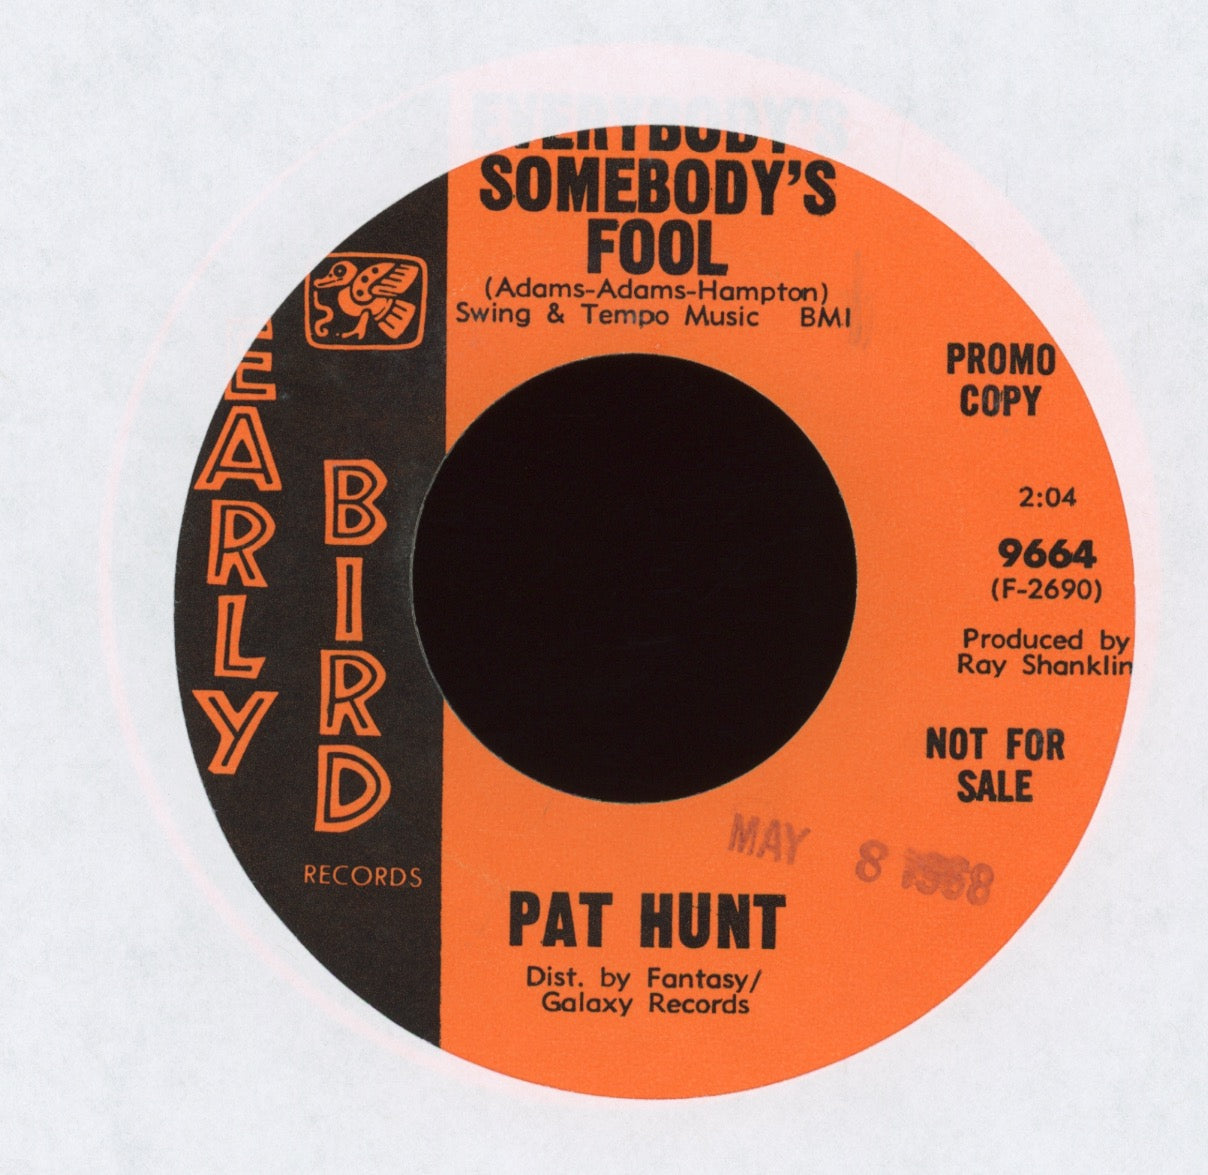 Pat Hunt - Super Cool (You're Just Super Fool) on Early Bird Promo Funk 45